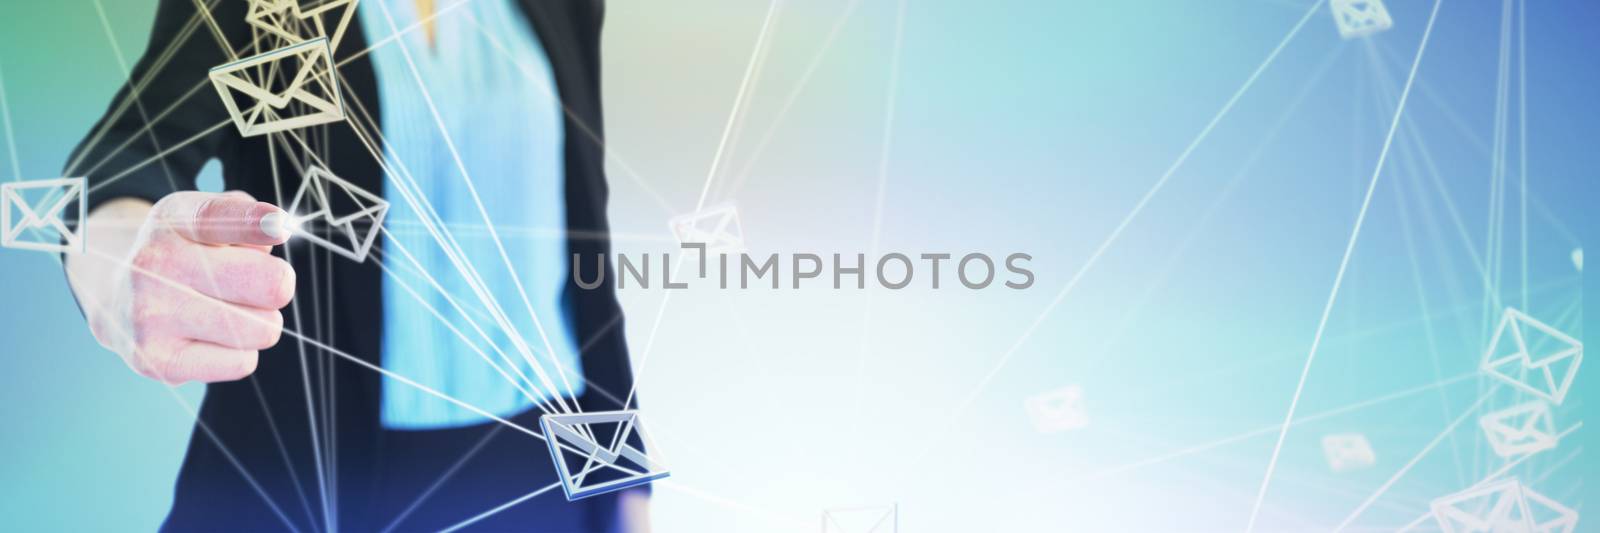 Mid section of businesswoman touching imaginary interface against abstract grey background